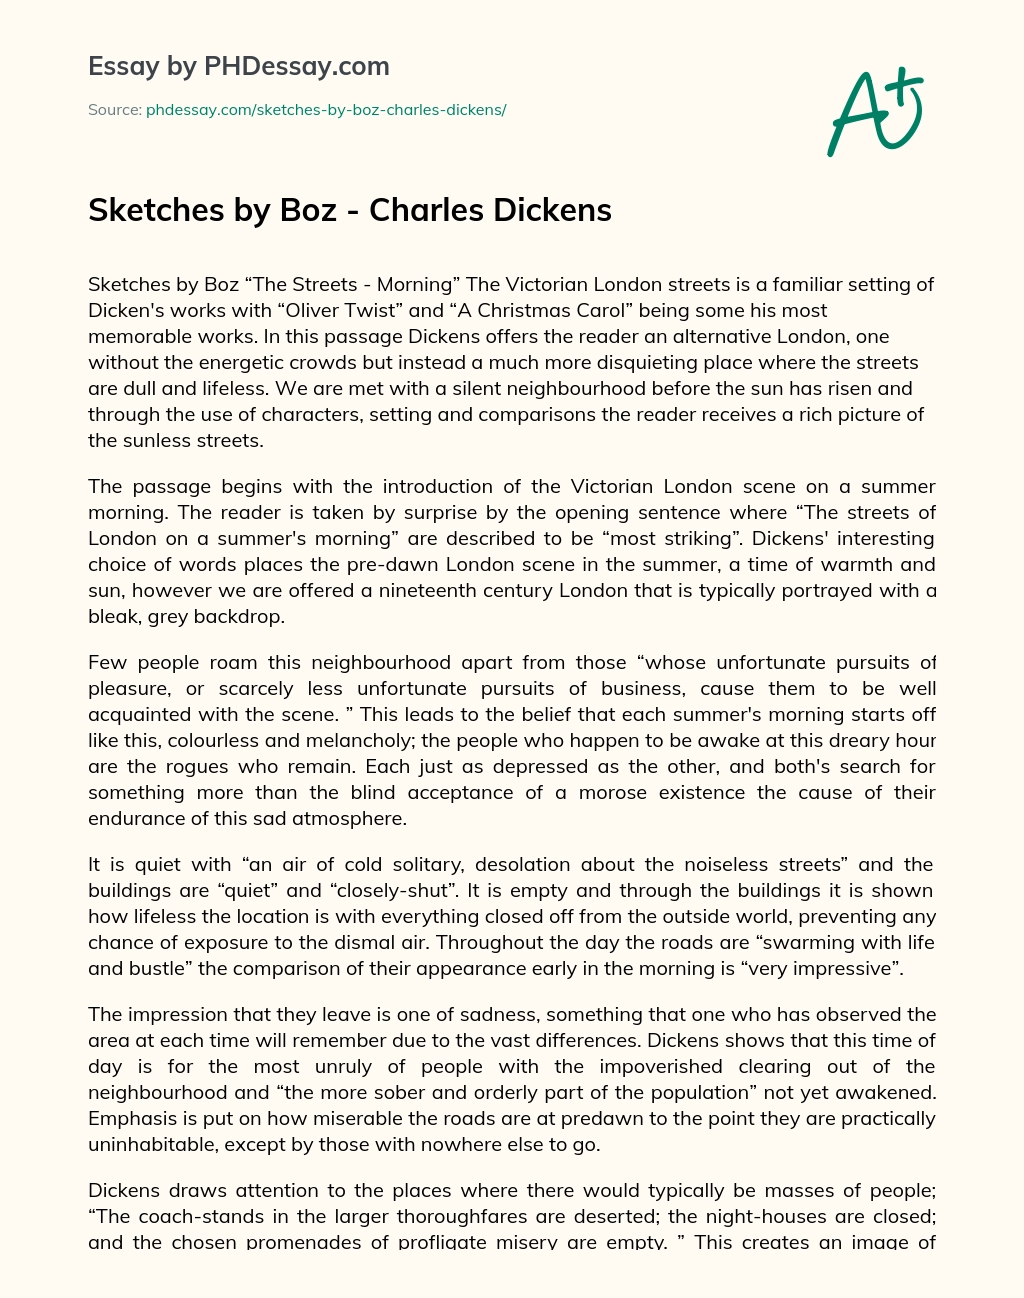 Sketches by Boz – Charles Dickens essay